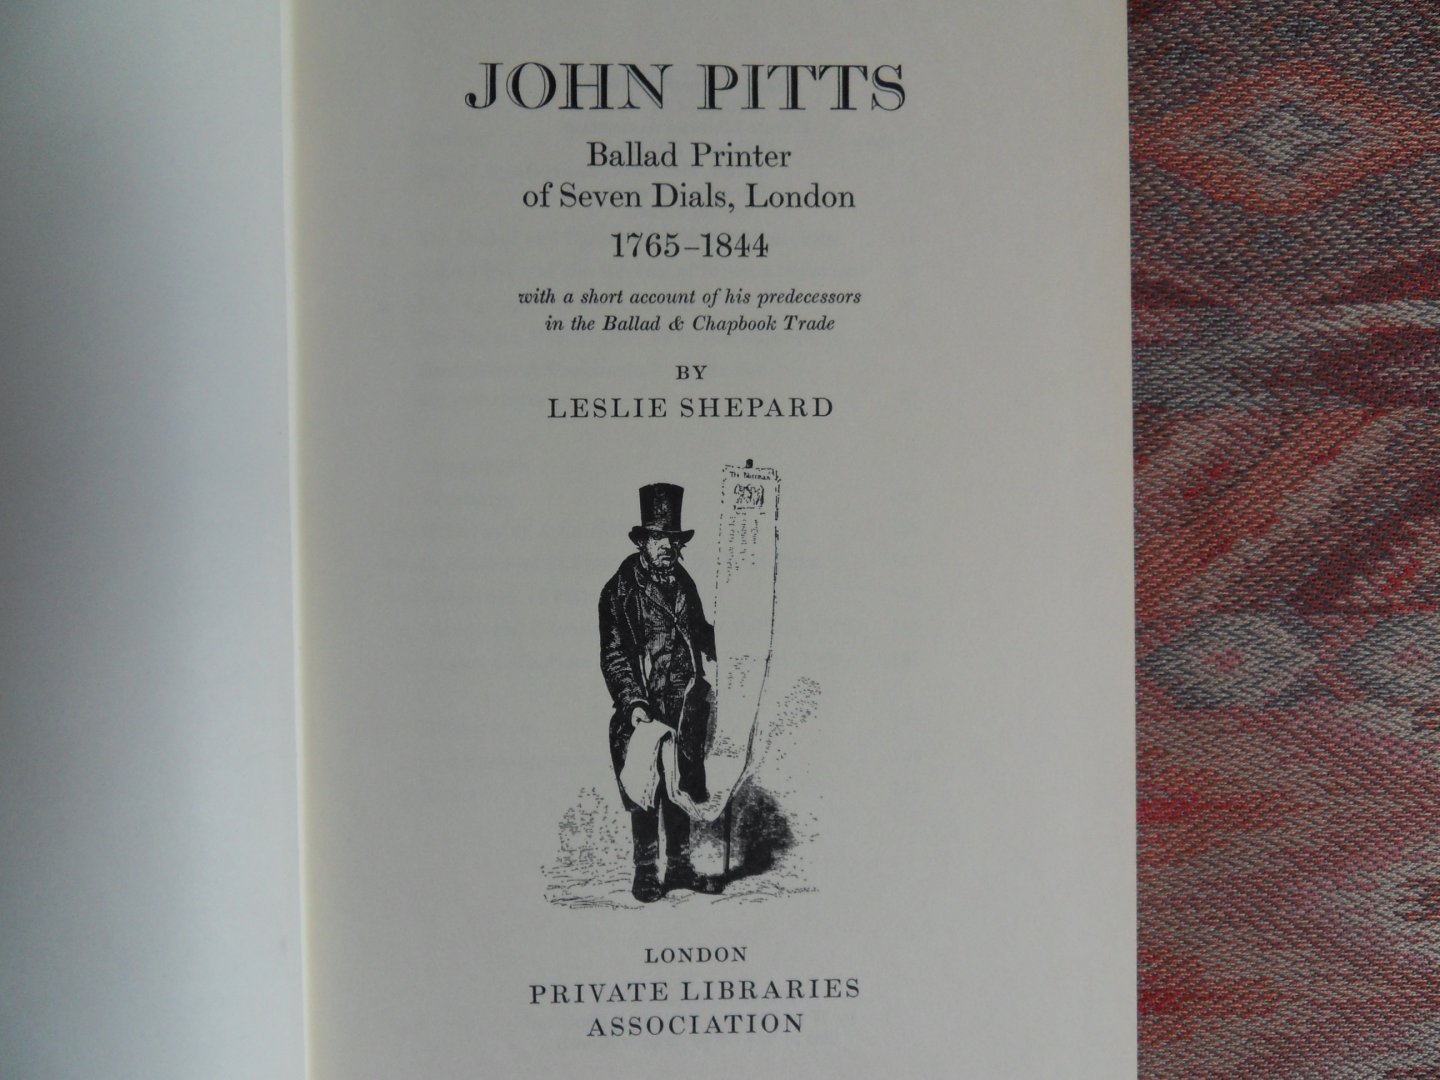 Shephard, Leslie. - John Pitts. - Ballad Printer of Seven Dials, London. 1765 - 1844. - With a short account of his predecessors in the Ballad & Chapbook Trade.